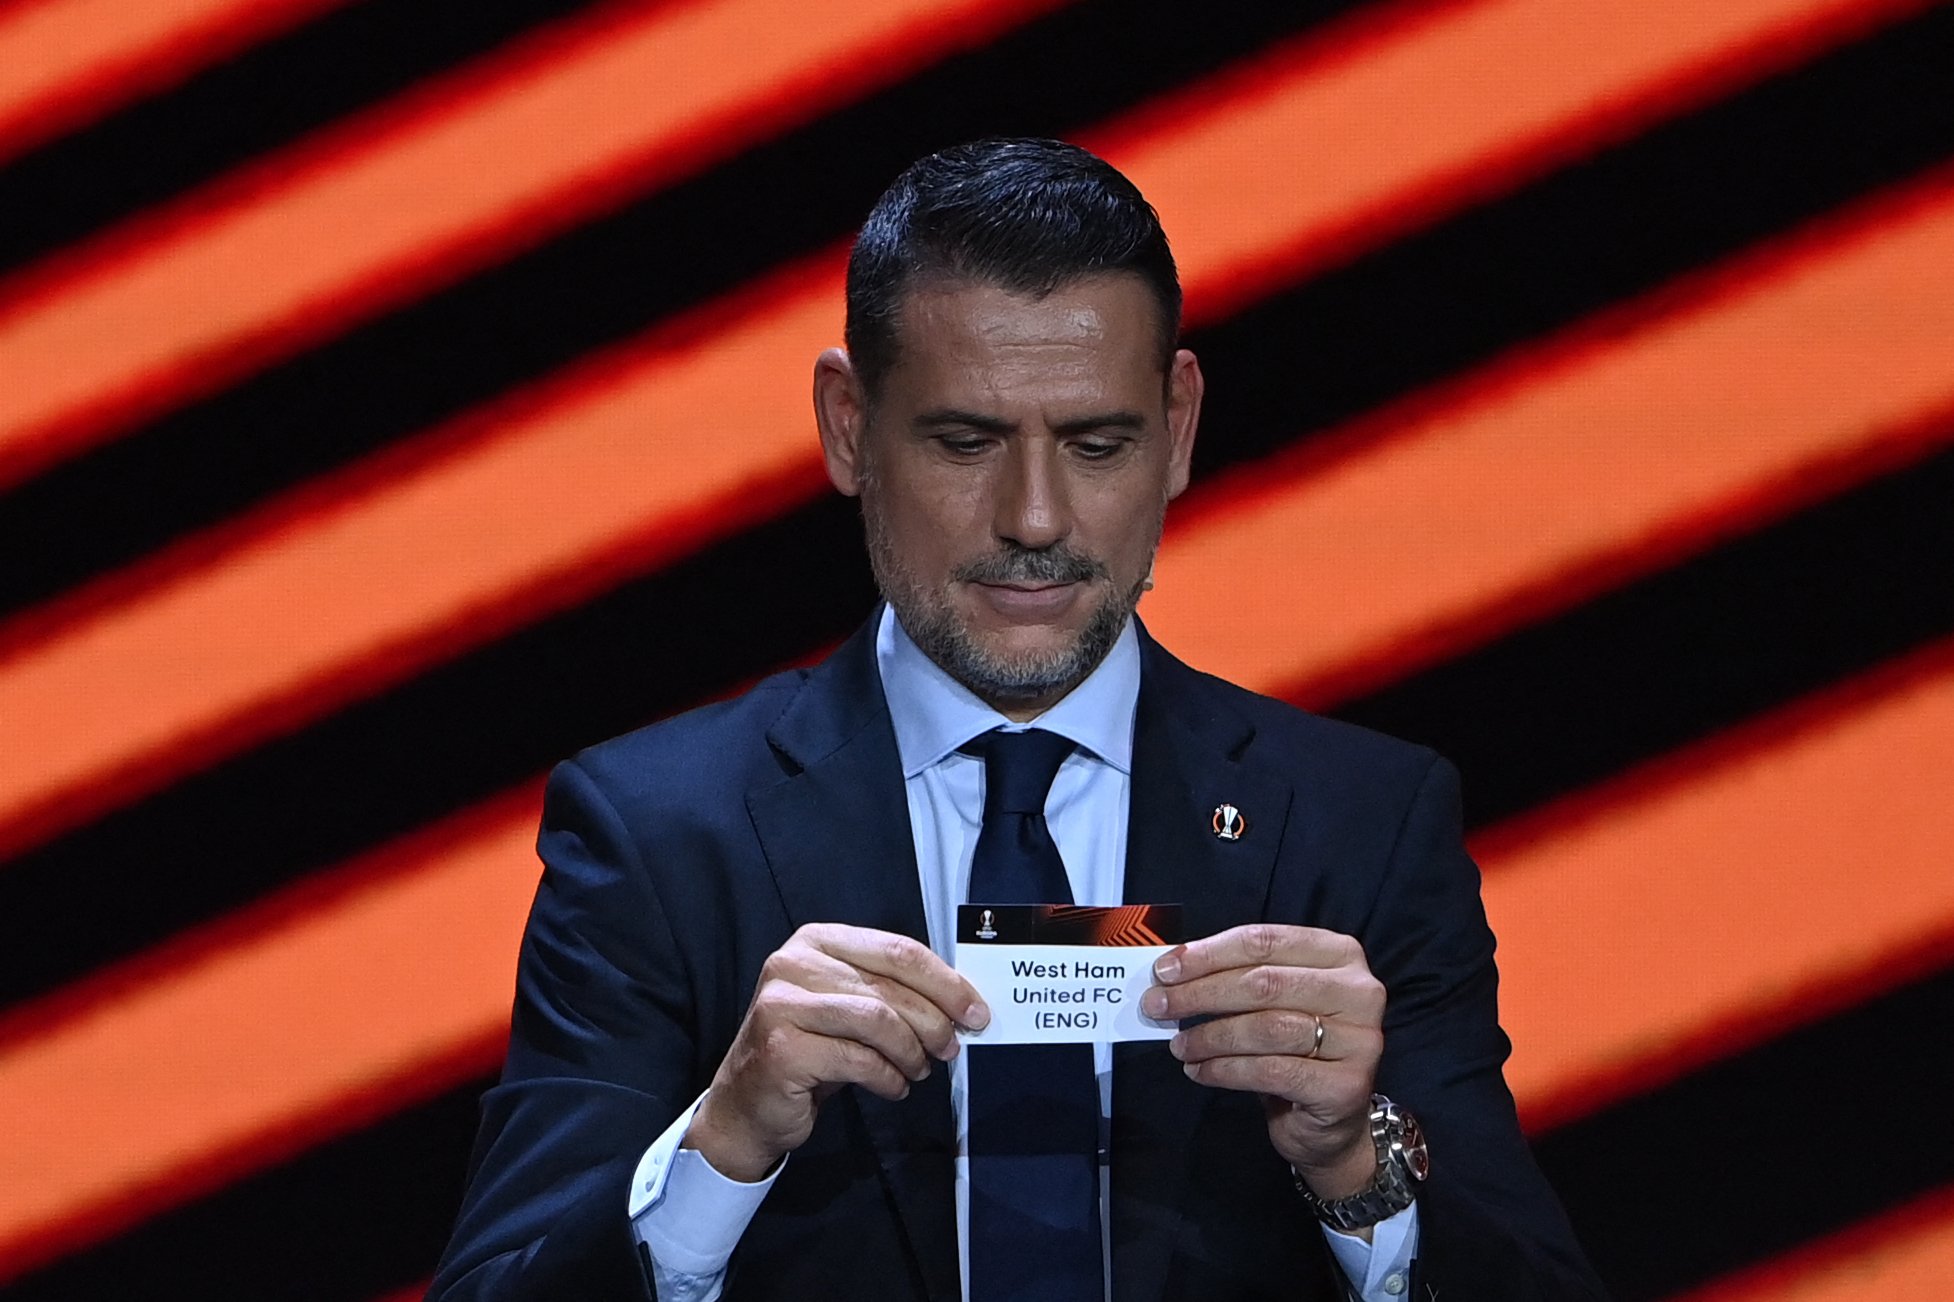 Remarkable West Ham links in Europa League results but last 16 opponents no clearer